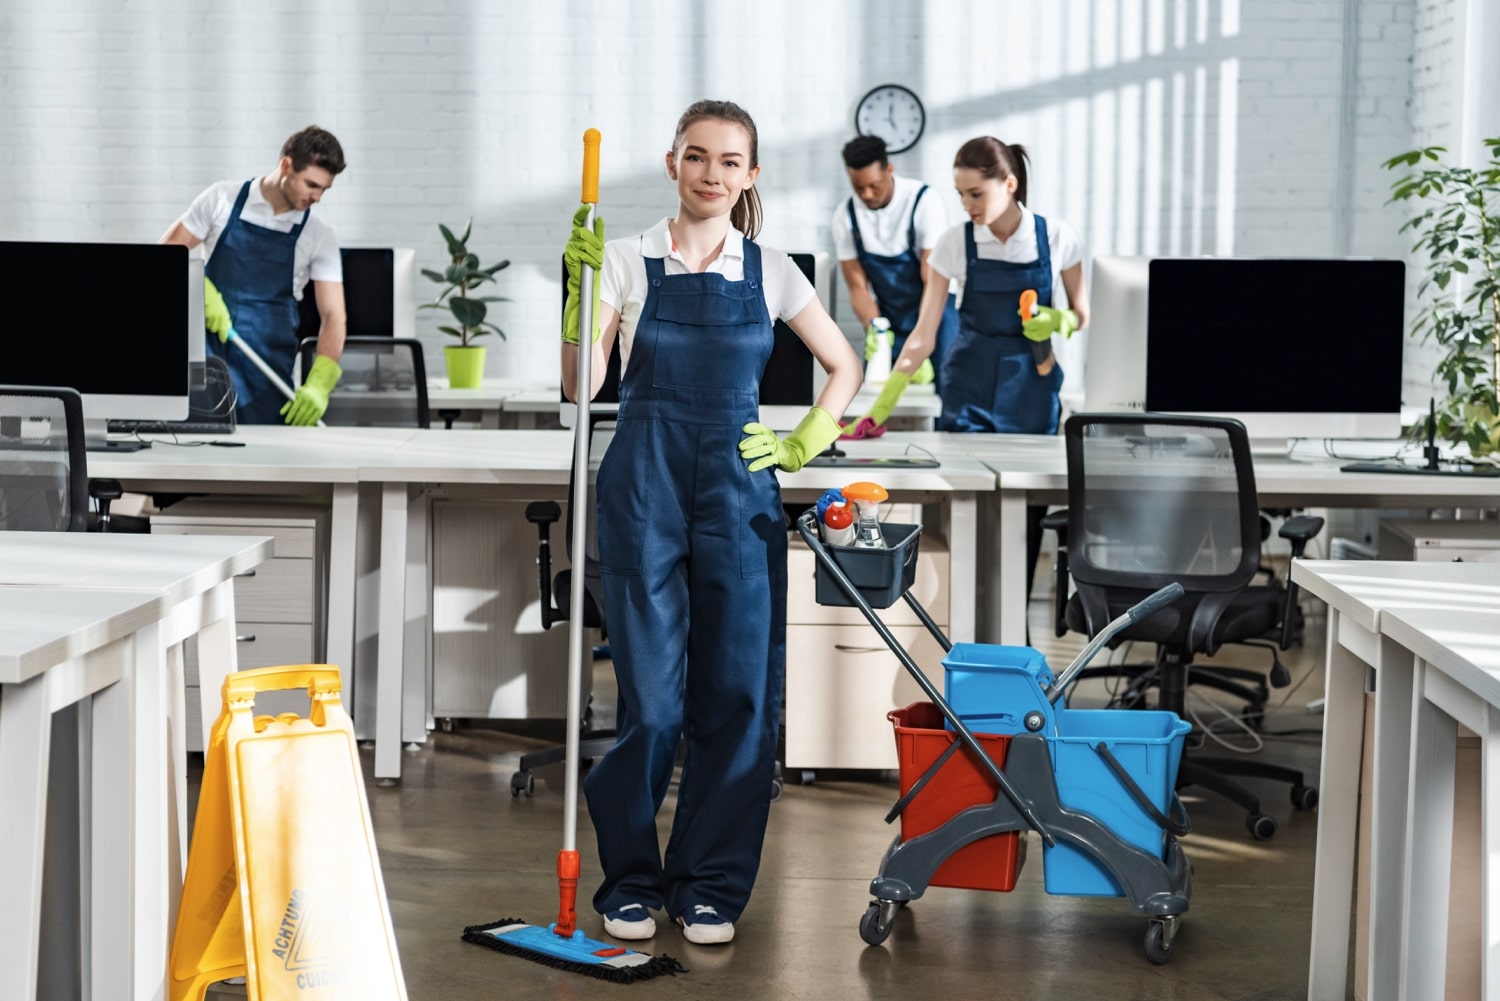 Choosing the Right Cleaning Service for Your Workplace